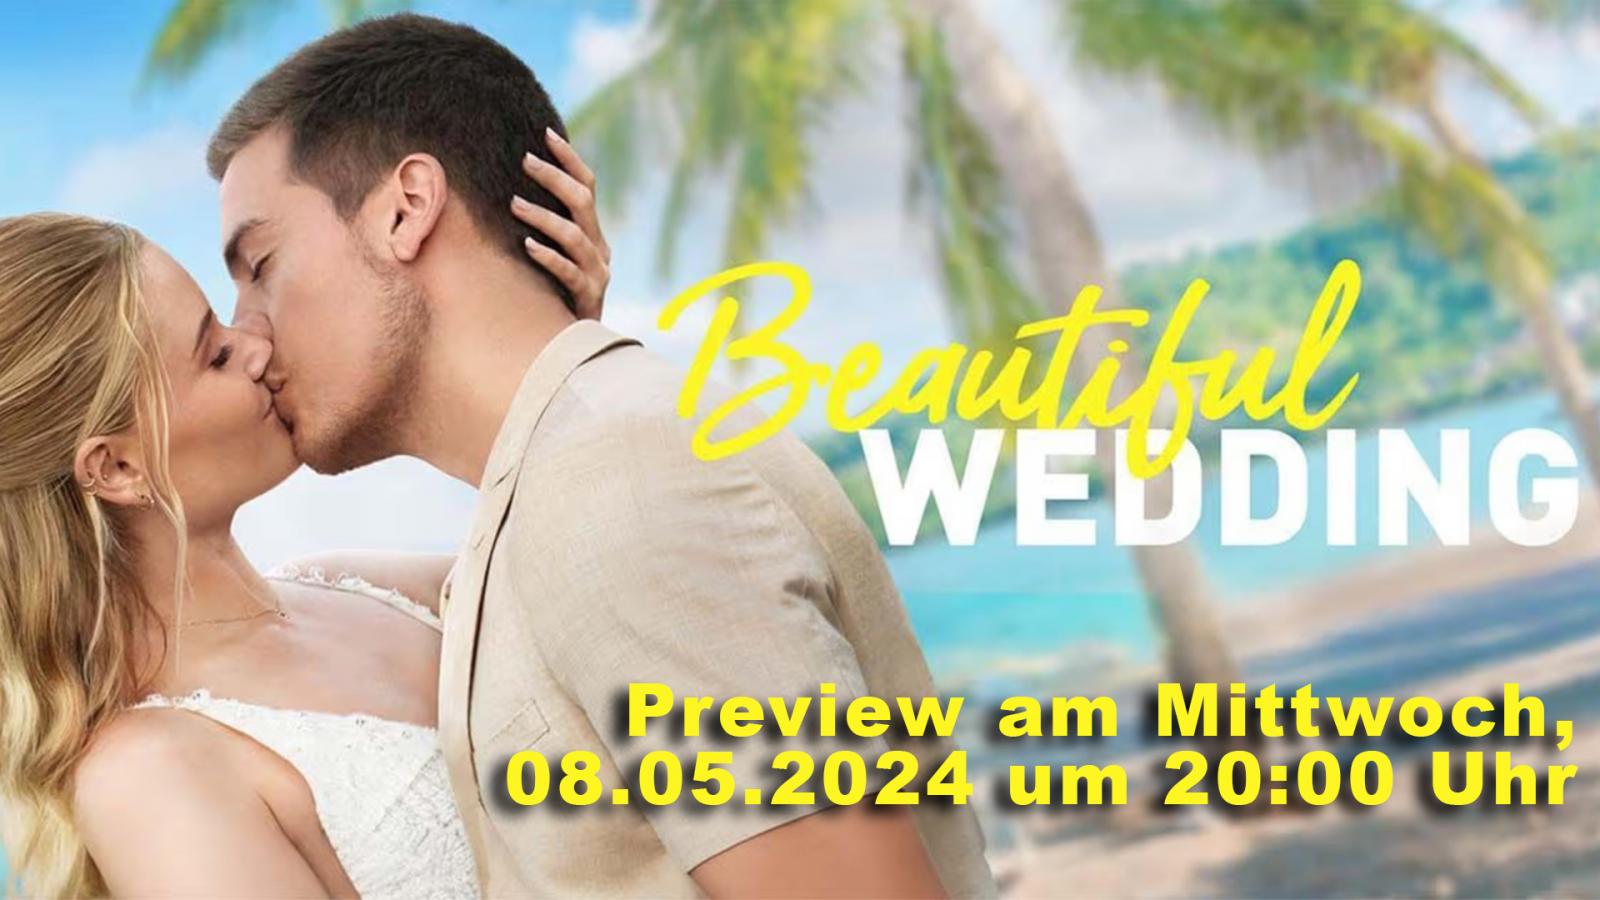 PREVIEW: "Beautiful Wedding"